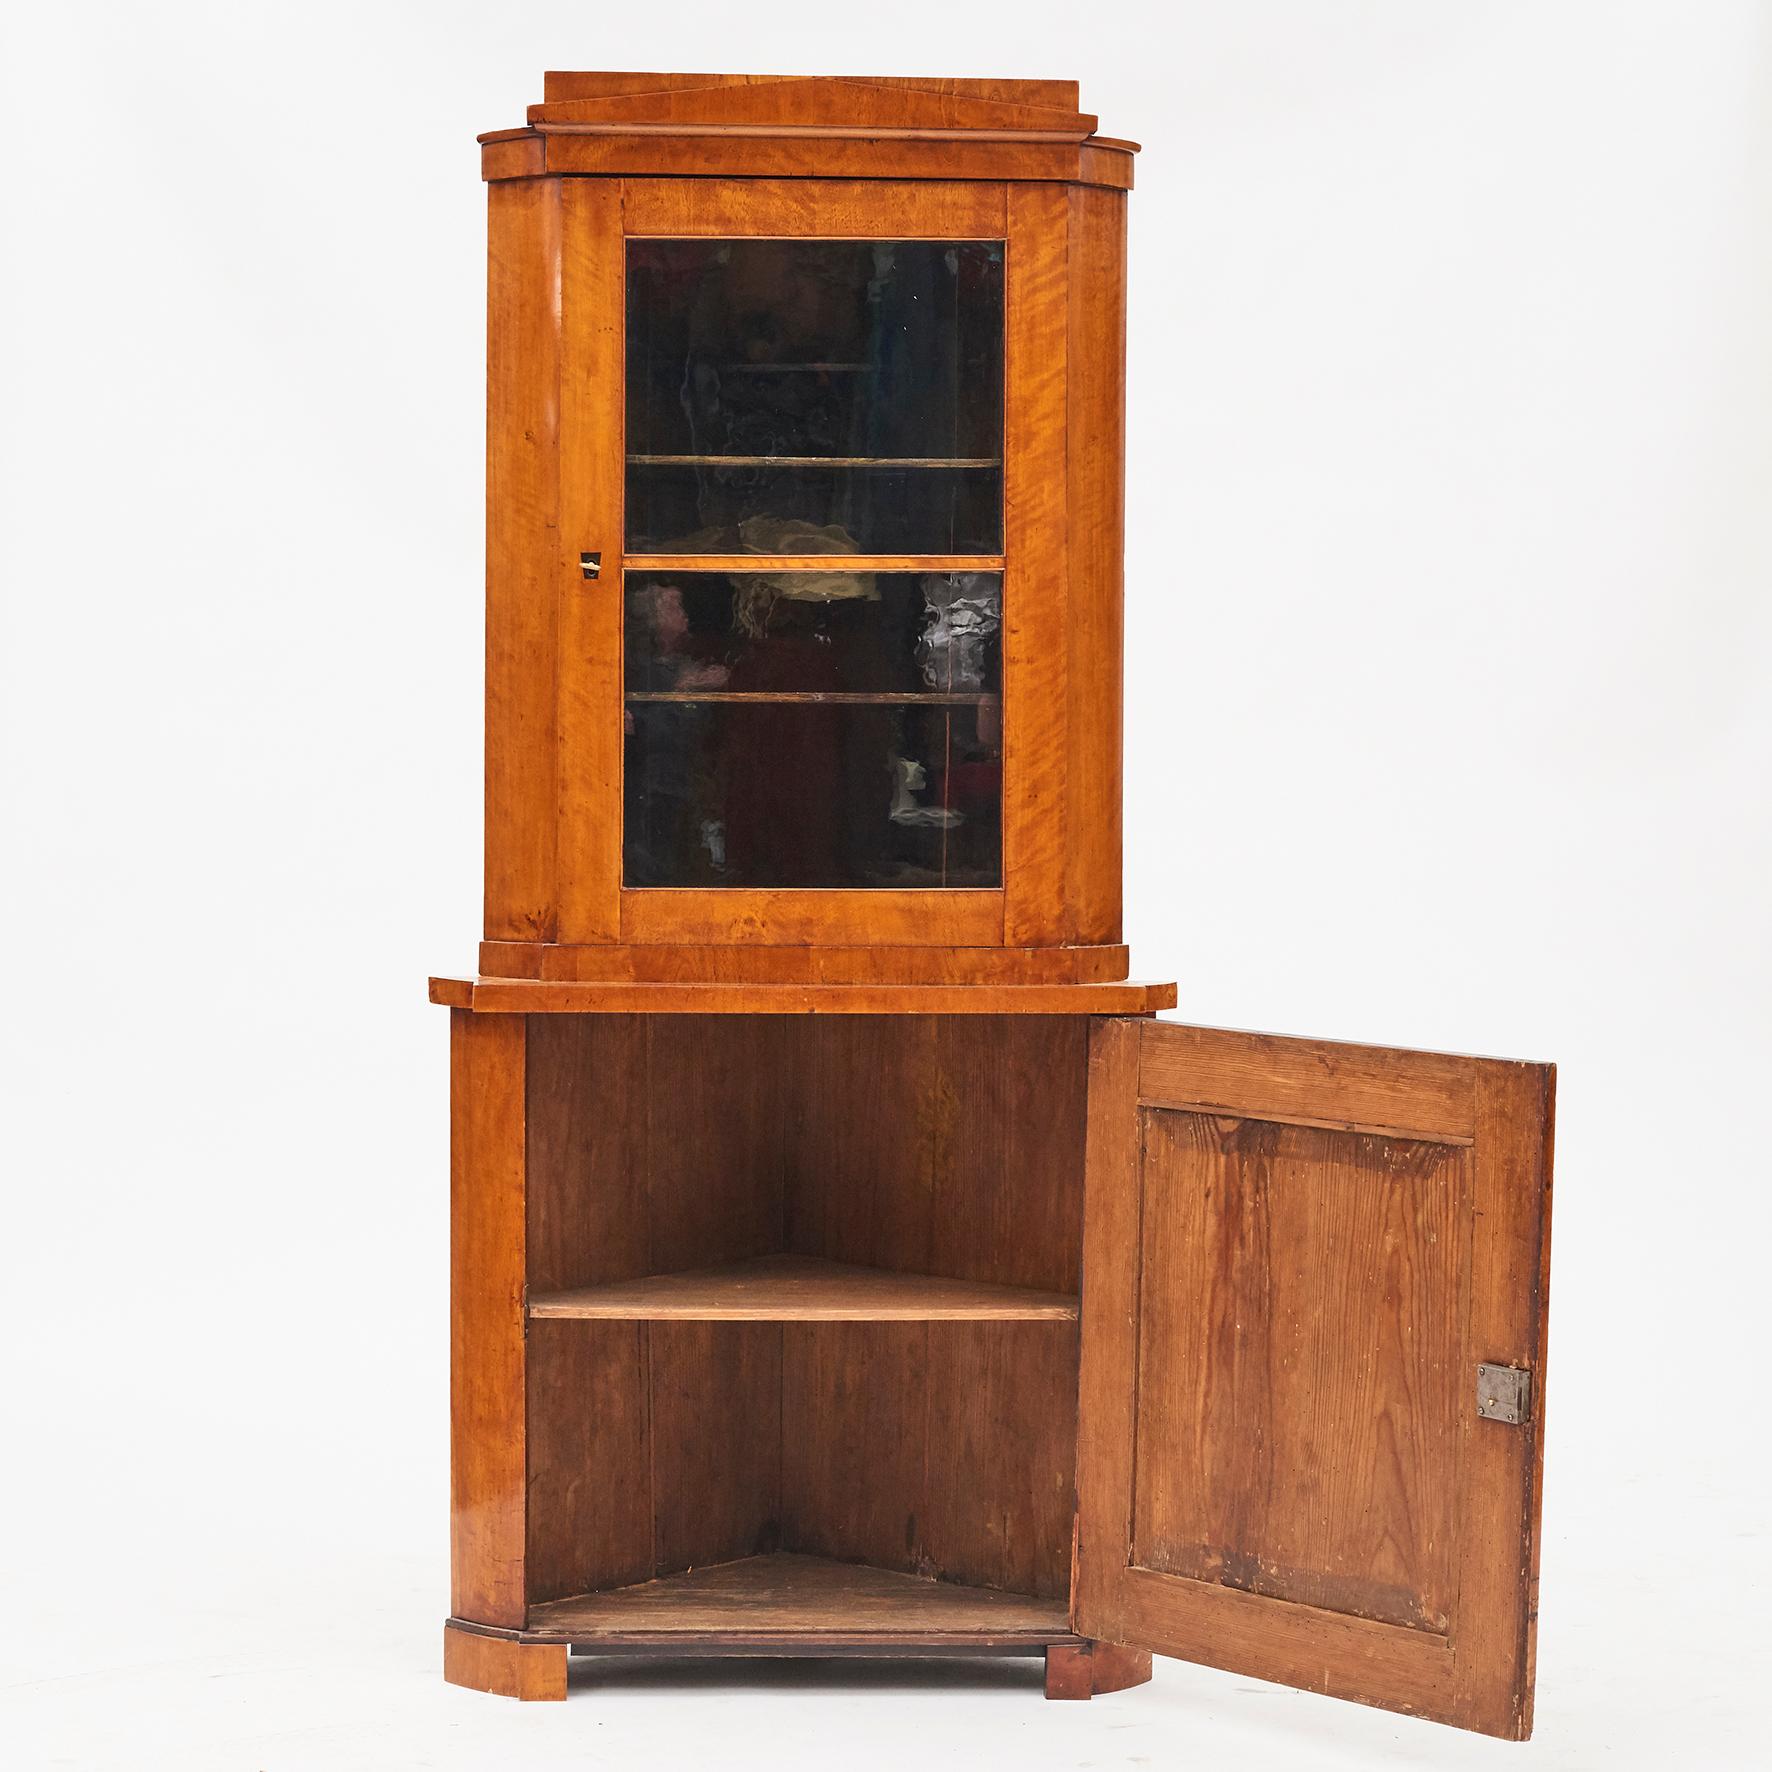 Biedermeier corner cabinet. Vienna, Austria, circa 1820-1830.

Pine veneered with flamed birch wood, beautiful grain and glow. Original condition with a light polished finish.
The cabinet is in two parts, upper part with 1 glass door, lower part